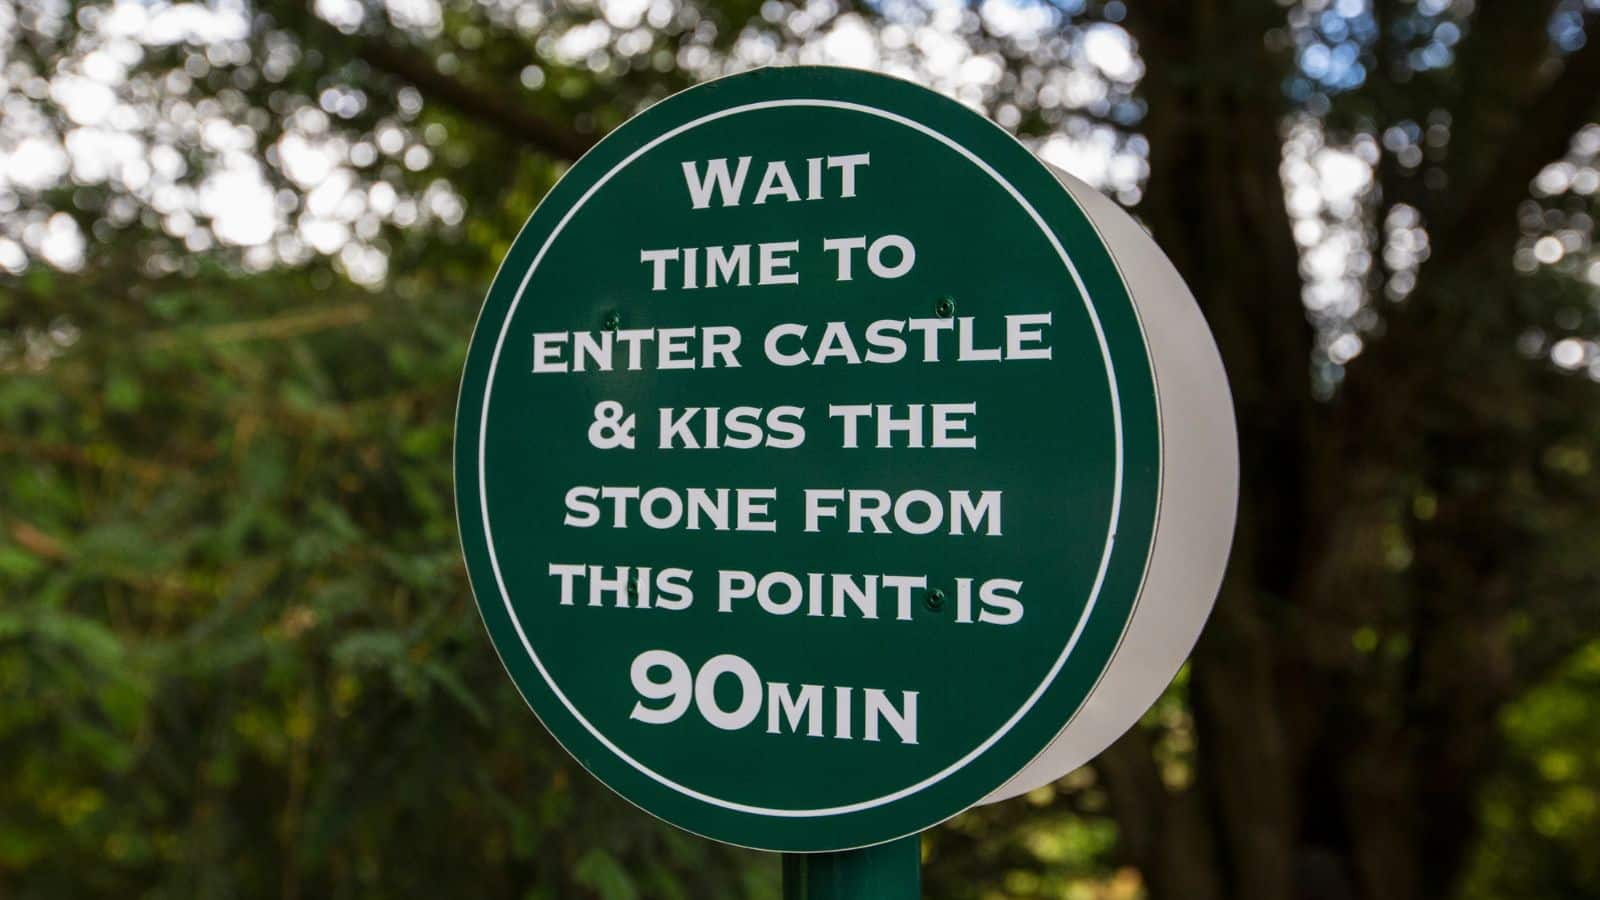 <p>One of the more “unique” things to do in Ireland is climb to the top of a castle, lay on your back, grasp two metal handrails, and kiss a stone. Sounds mad, but people travel from around the world to do it! Known as the Blarney Stone, they say kissing it grants you the gift of the gab.</p><p>The stone itself is in the once-mighty Blarney Castle. Its impressive ruins and surrounding gardens are worth visiting regardless of how you feel about the legendary rock set within its walls.</p>